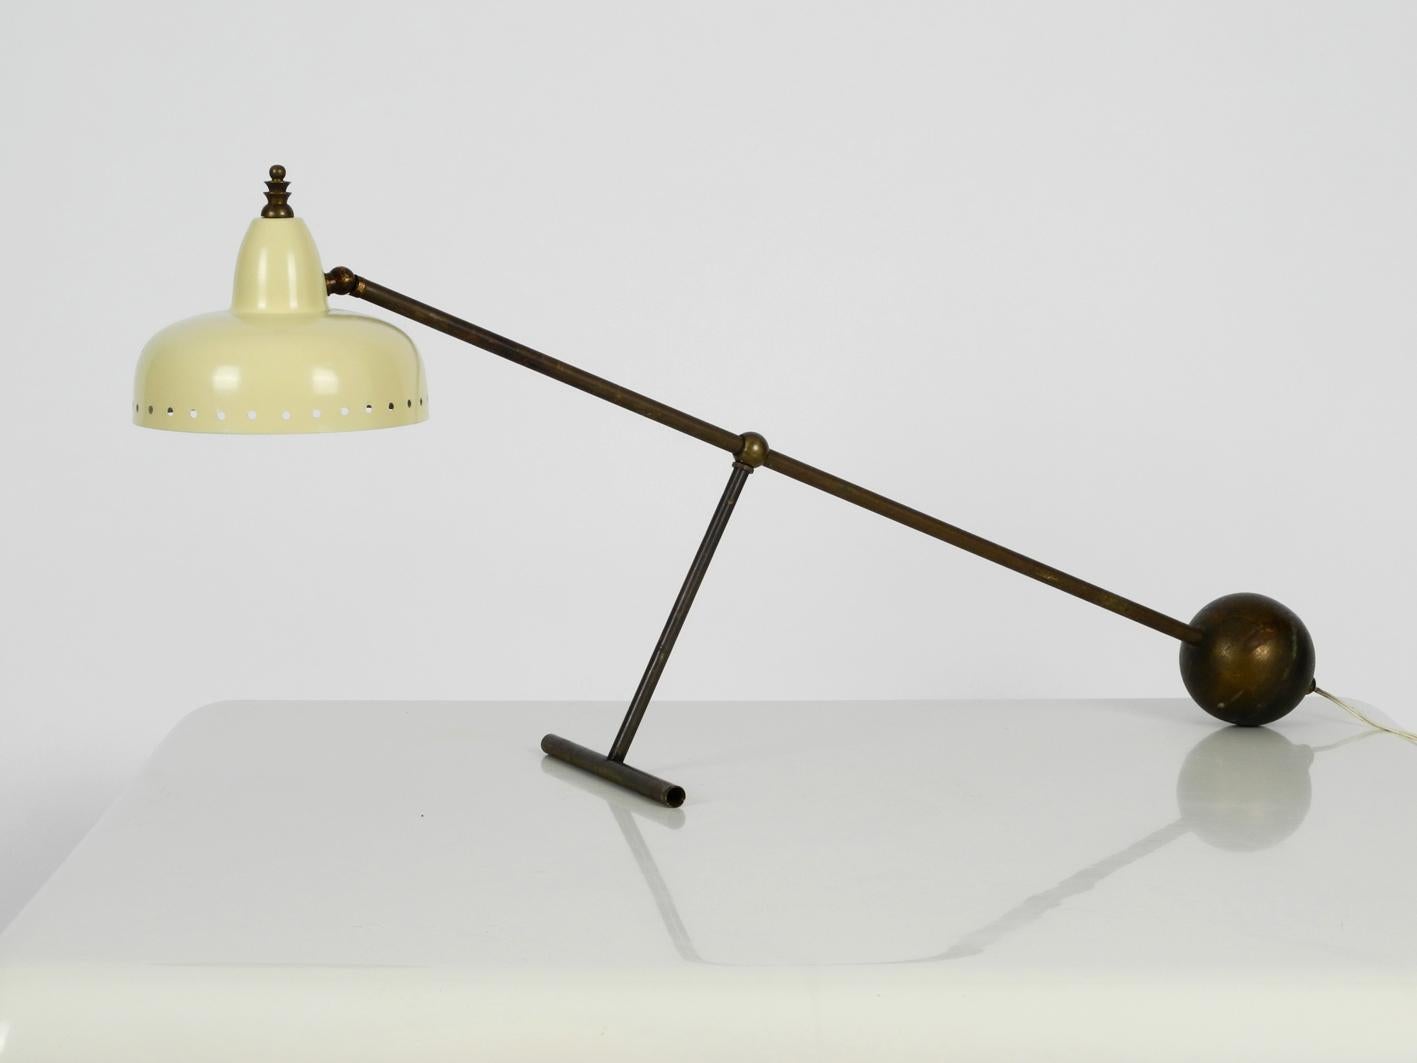 Large Italian Mid-Century Modern Industrial height adjustable table lamp. Frame made of brass pipe inside the cable. Very beautiful elaborate lampshade in light yellow aluminium. Very nice striking mid-century design with fantastic patina. Very good